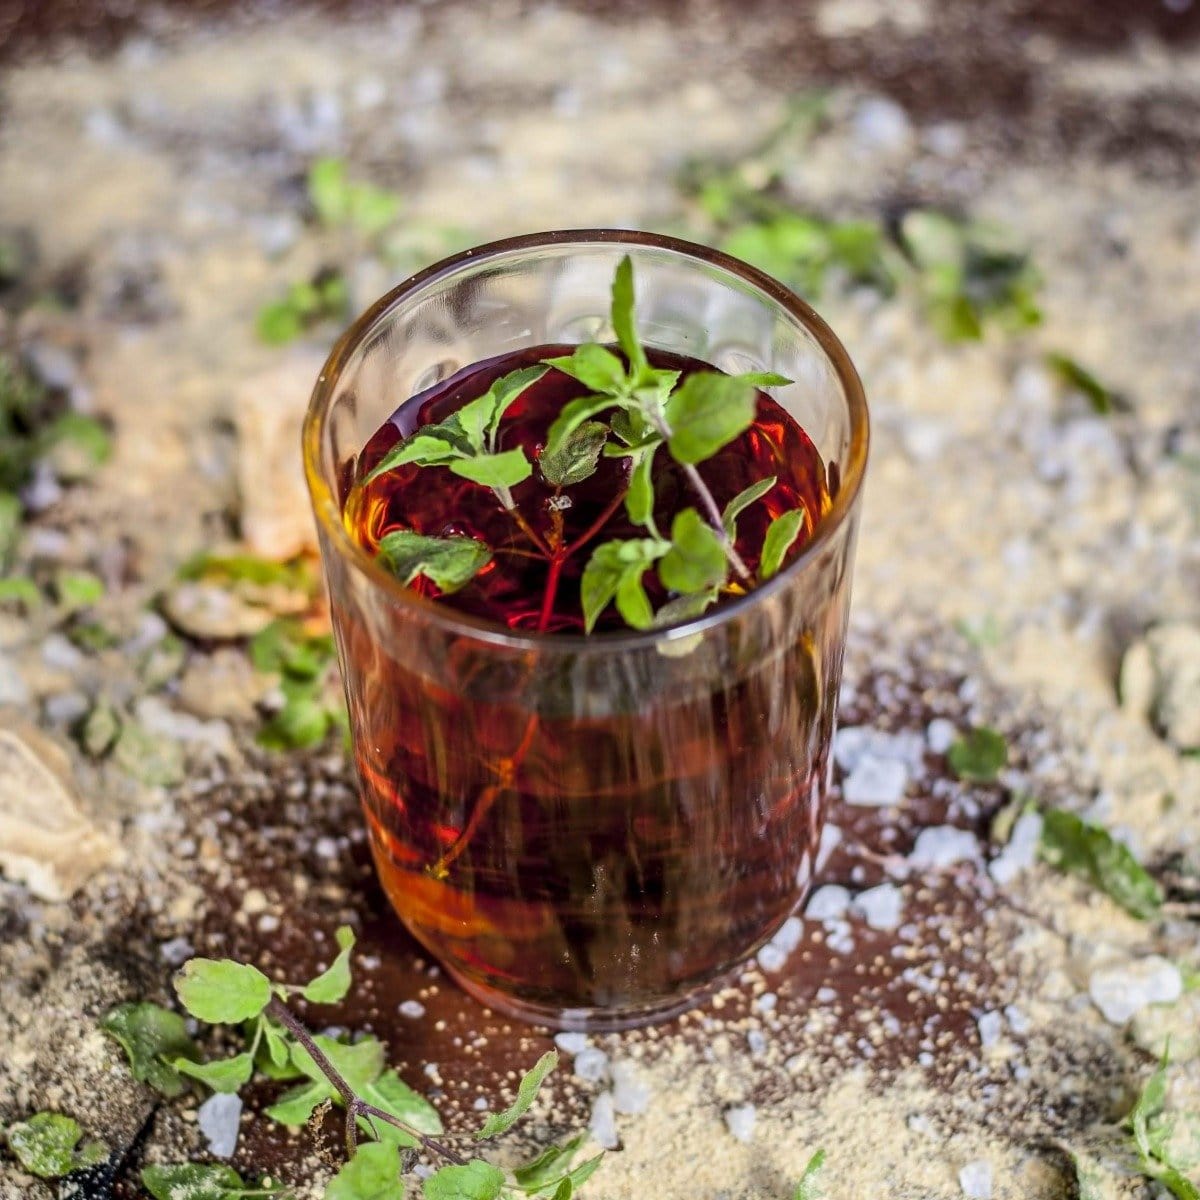 A glass of dark brown iced Bliss: Sacred Tulsi Adaptogen Tea from Magic Hour garnished with fresh mint leaves sits on a surface sprinkled with coarse salt and scattered green herbs. The translucent drink reveals the mint leaves, giving it a refreshing and earthy appearance.